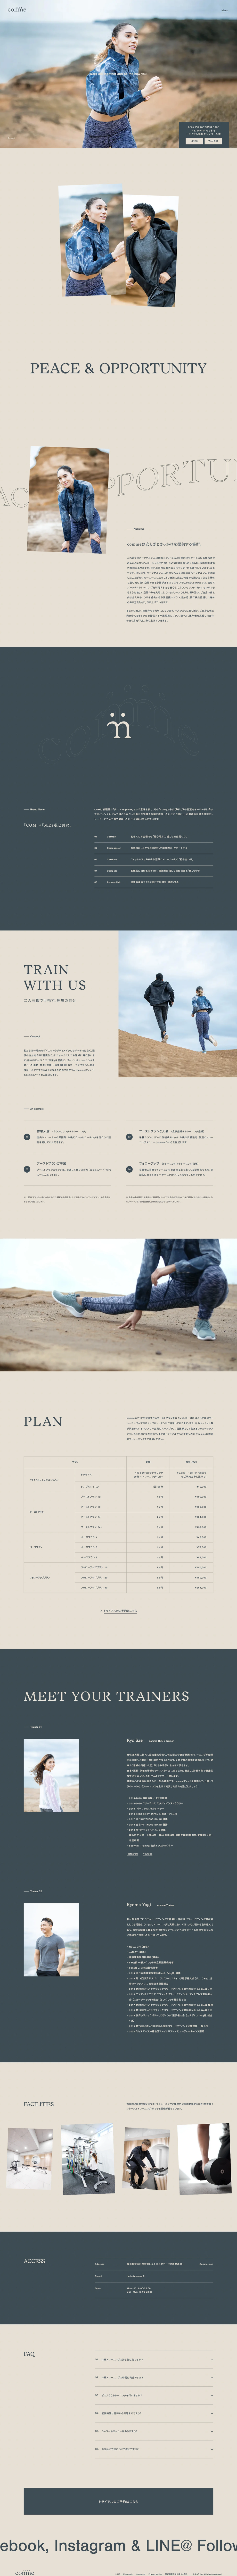 Comme Landing Page Example: Work out together and be the new you.